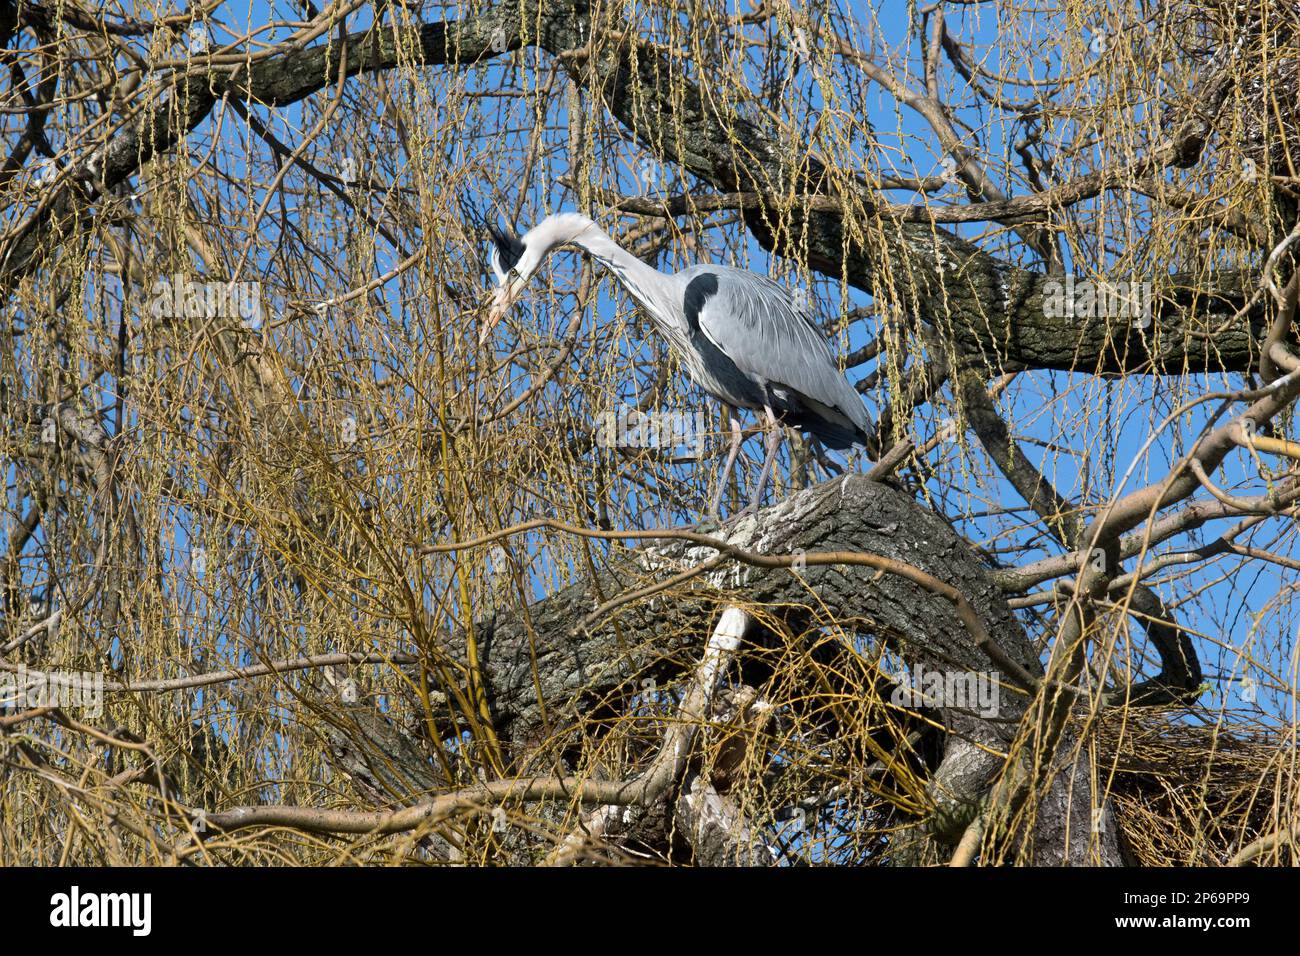 Grey heron (Ardea cinerea) perched in weeping willow tree at heronry / heron rookery in late winter Stock Photo